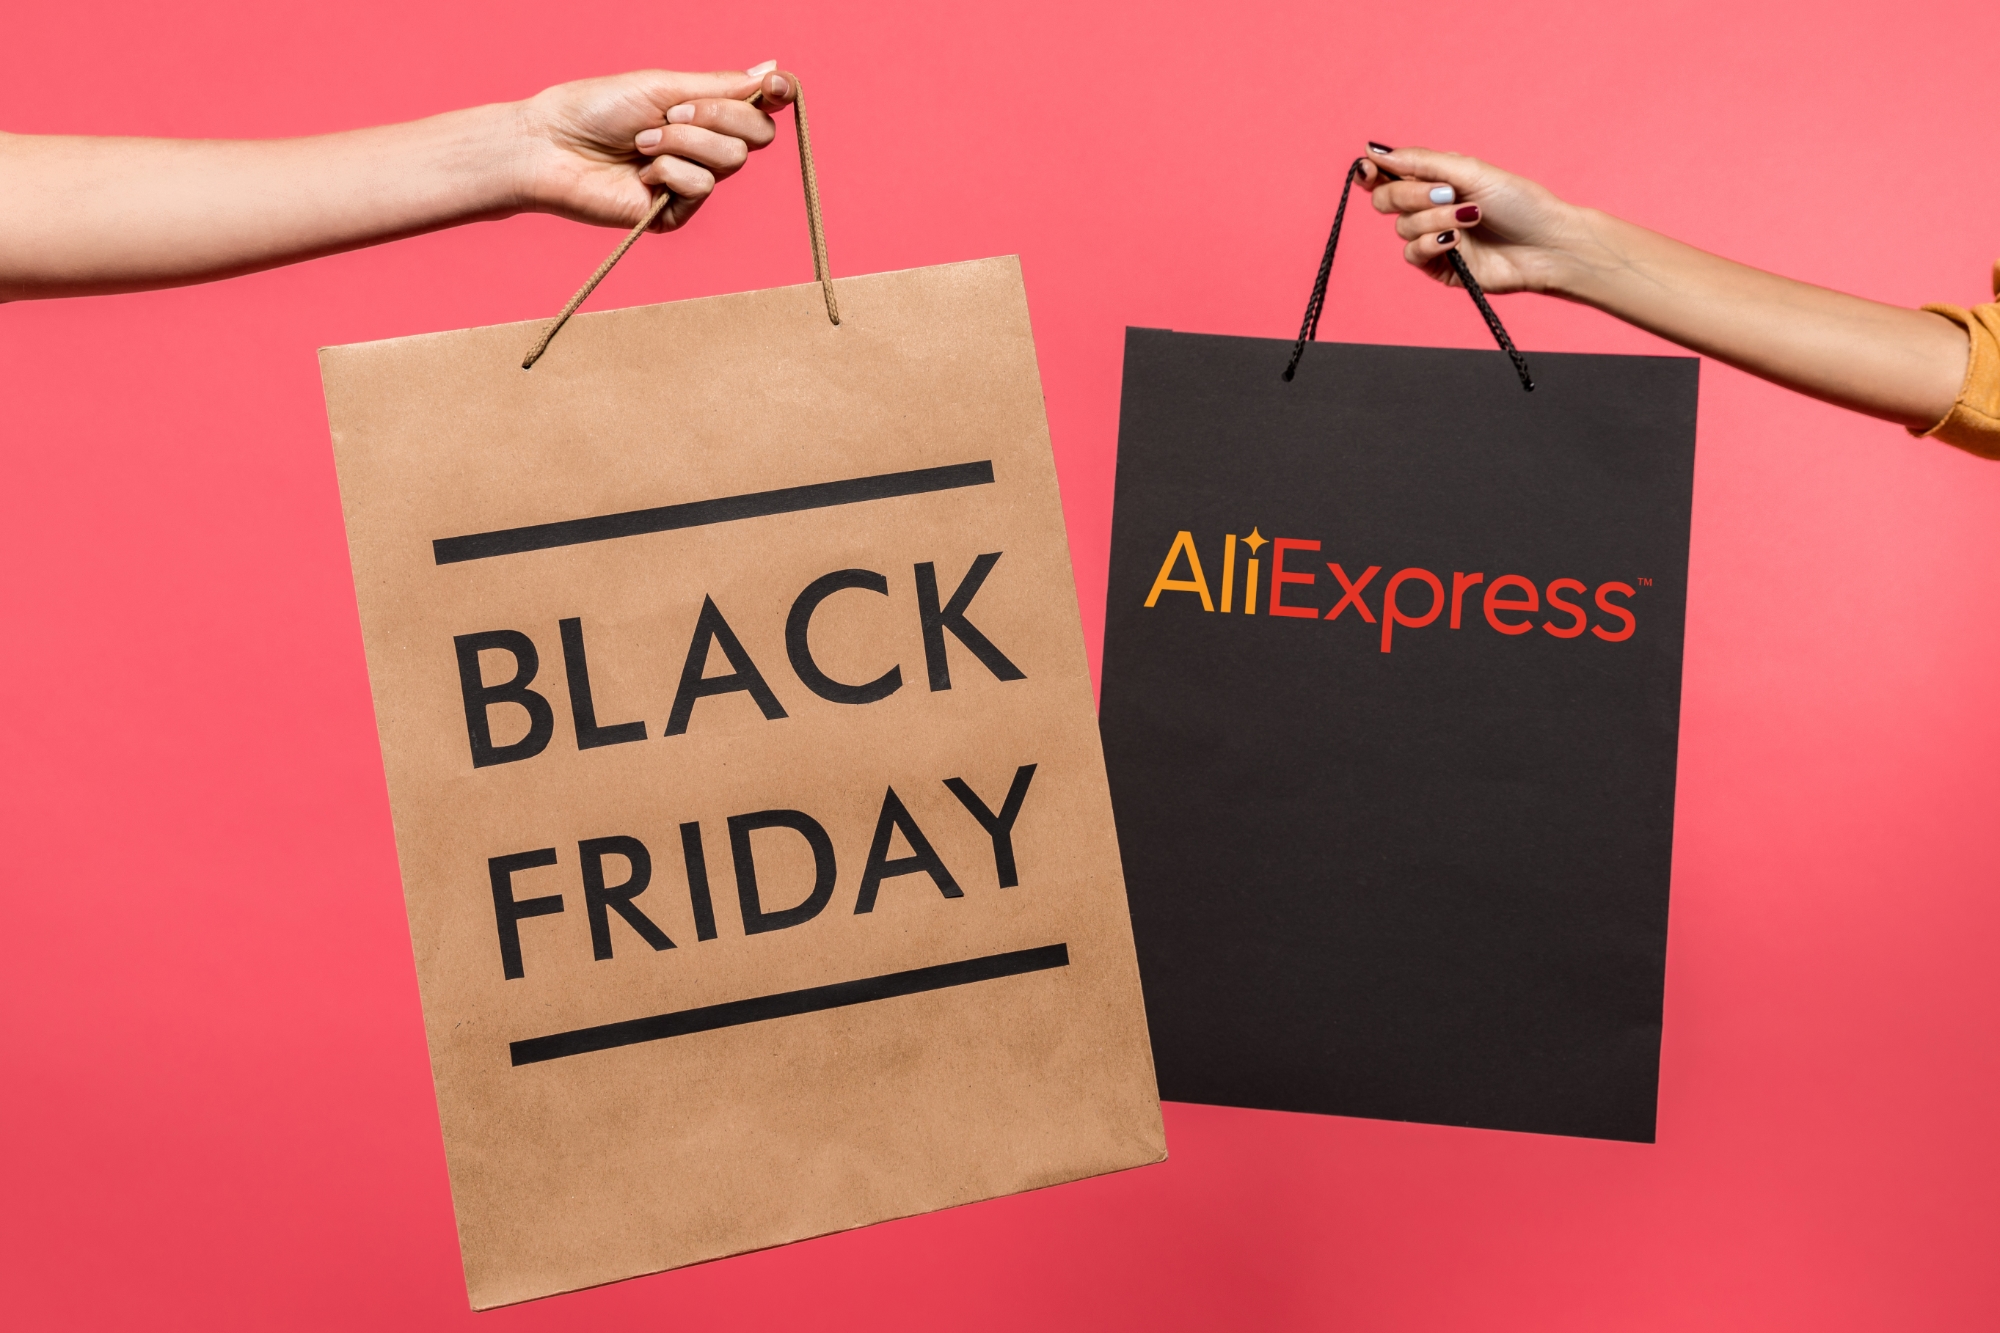 AliExpress Black Friday Shopping Promotional Codes for Gagadget Readers